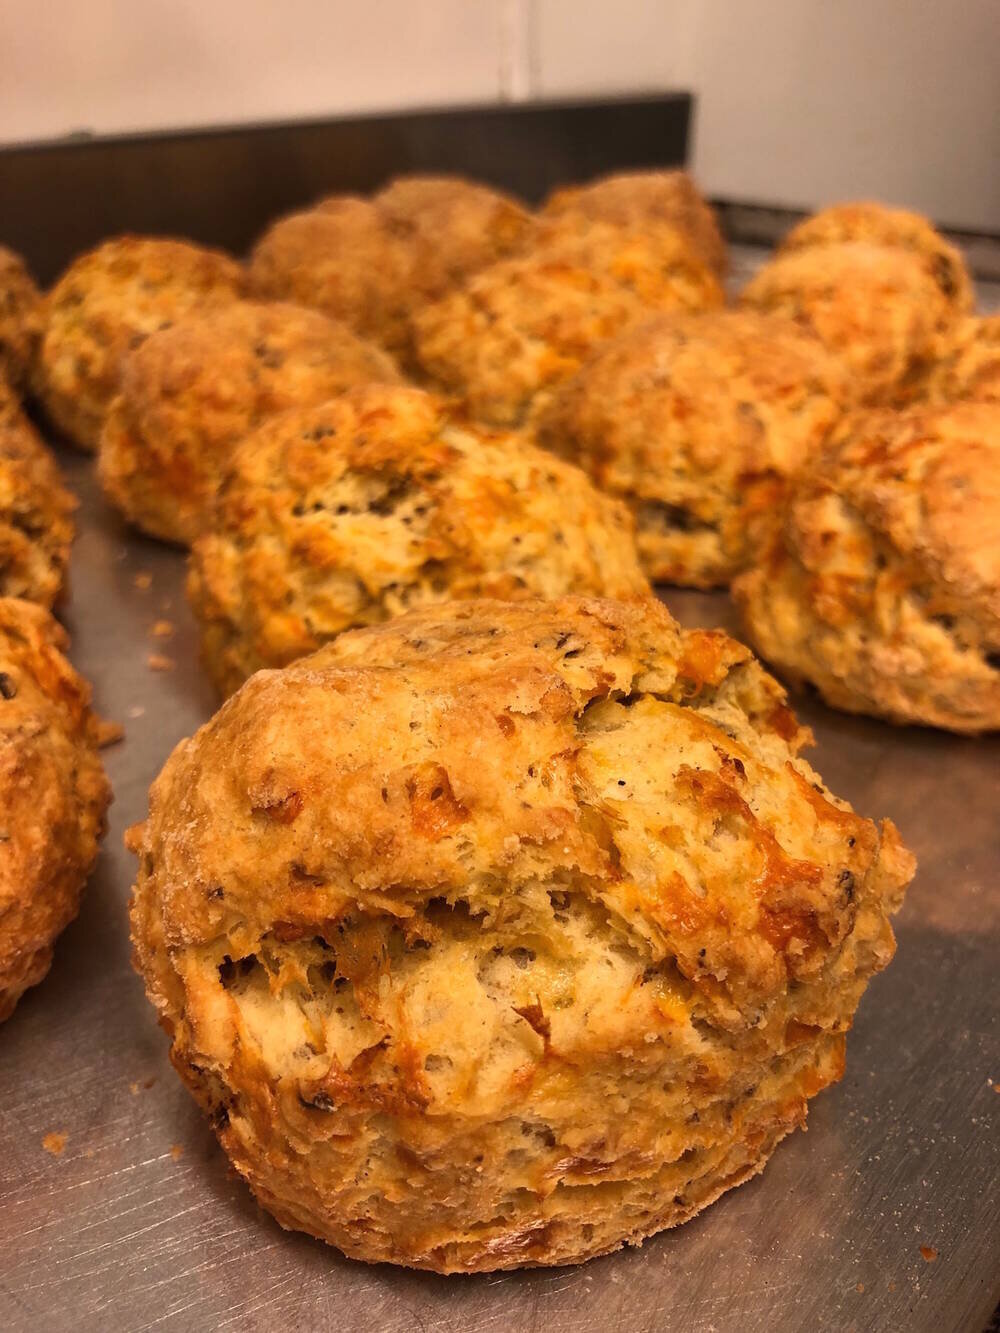 HAGGIS & CHEESE SCONES - Recipe from the robert burns birthplace museumIngredients1lb/500g self-raising flour4oz/100g margarinePinch of salt1oz/30g mature Scottish cheddar2oz/60g grated uncooked haggis2 beaten eggsMilkMethodSet your oven to 165C/330F/Gas mark 3.Rub the flour, margarine and salt together until the texture resembles fine breadcrumbs.Mix in the cheese and haggis, and then add the eggs and enough milk to create a soft dough mixture.Turn out onto a dry floured surface and roll to about 1.5 inches/4cm thick.Use a scone ring cutter to cut out your scones.You can brush the top of the scones lightly with milk or beaten egg to give a stronger colour if desired, but this is not essential.Place them on a metal baking tray and cook in the oven for 15–20 minutes until lightly browned on top.Enjoy!